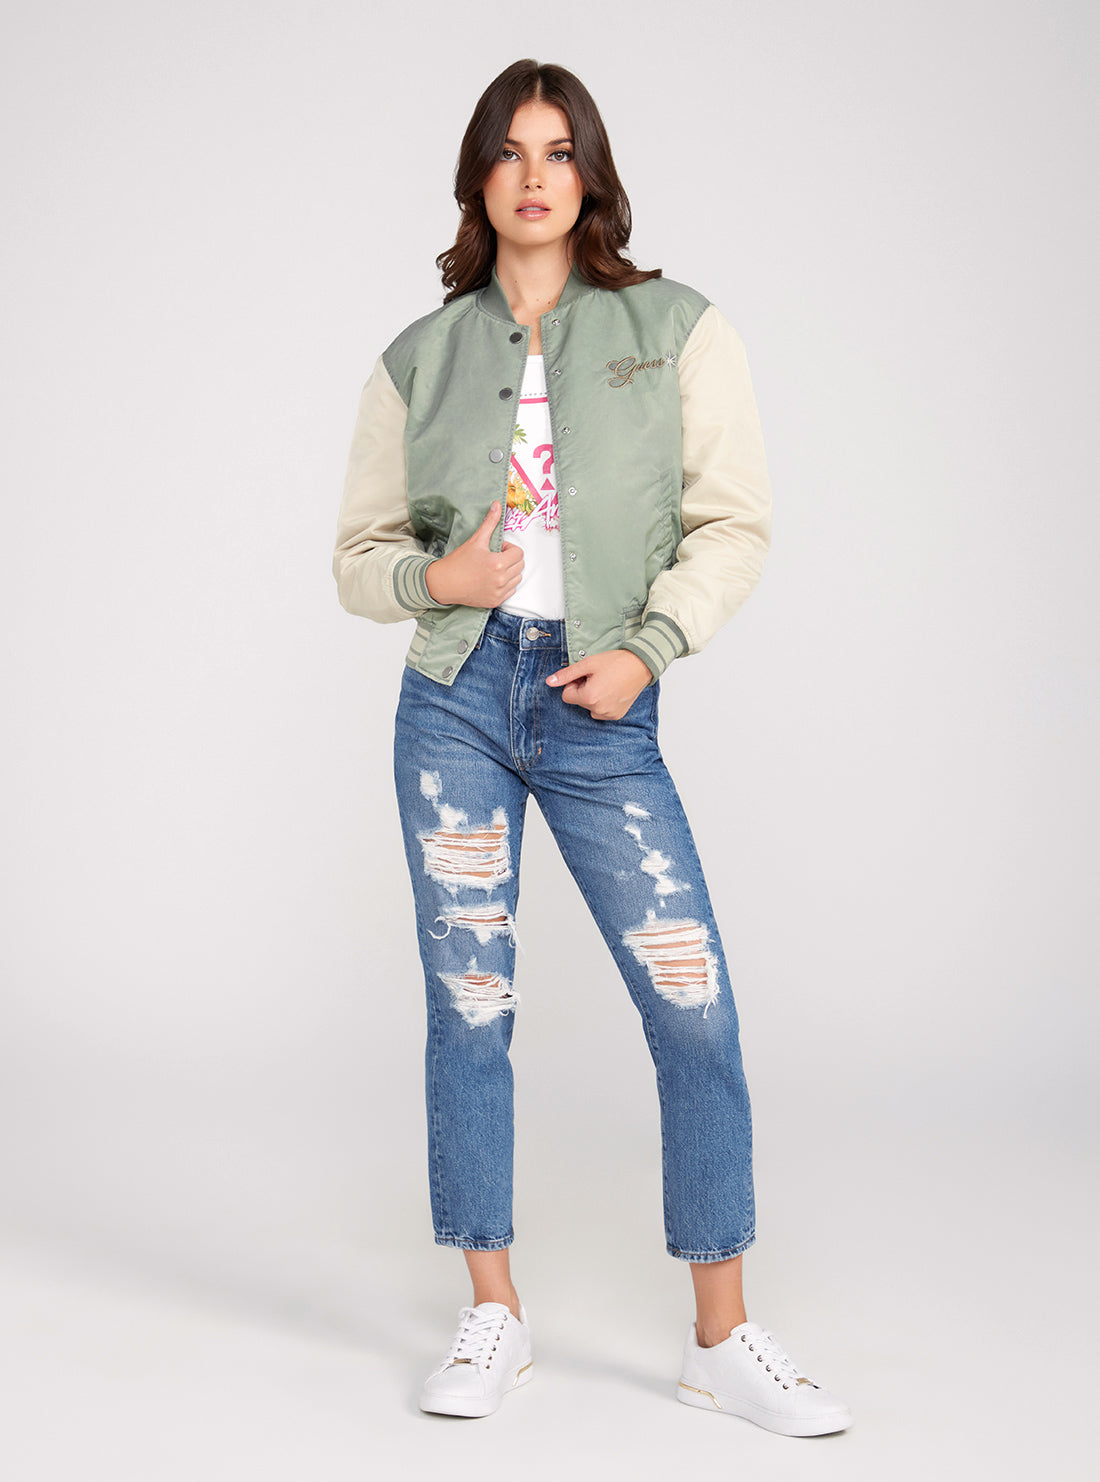 GUESS Green Felicia Embro Bomber Jacket full view